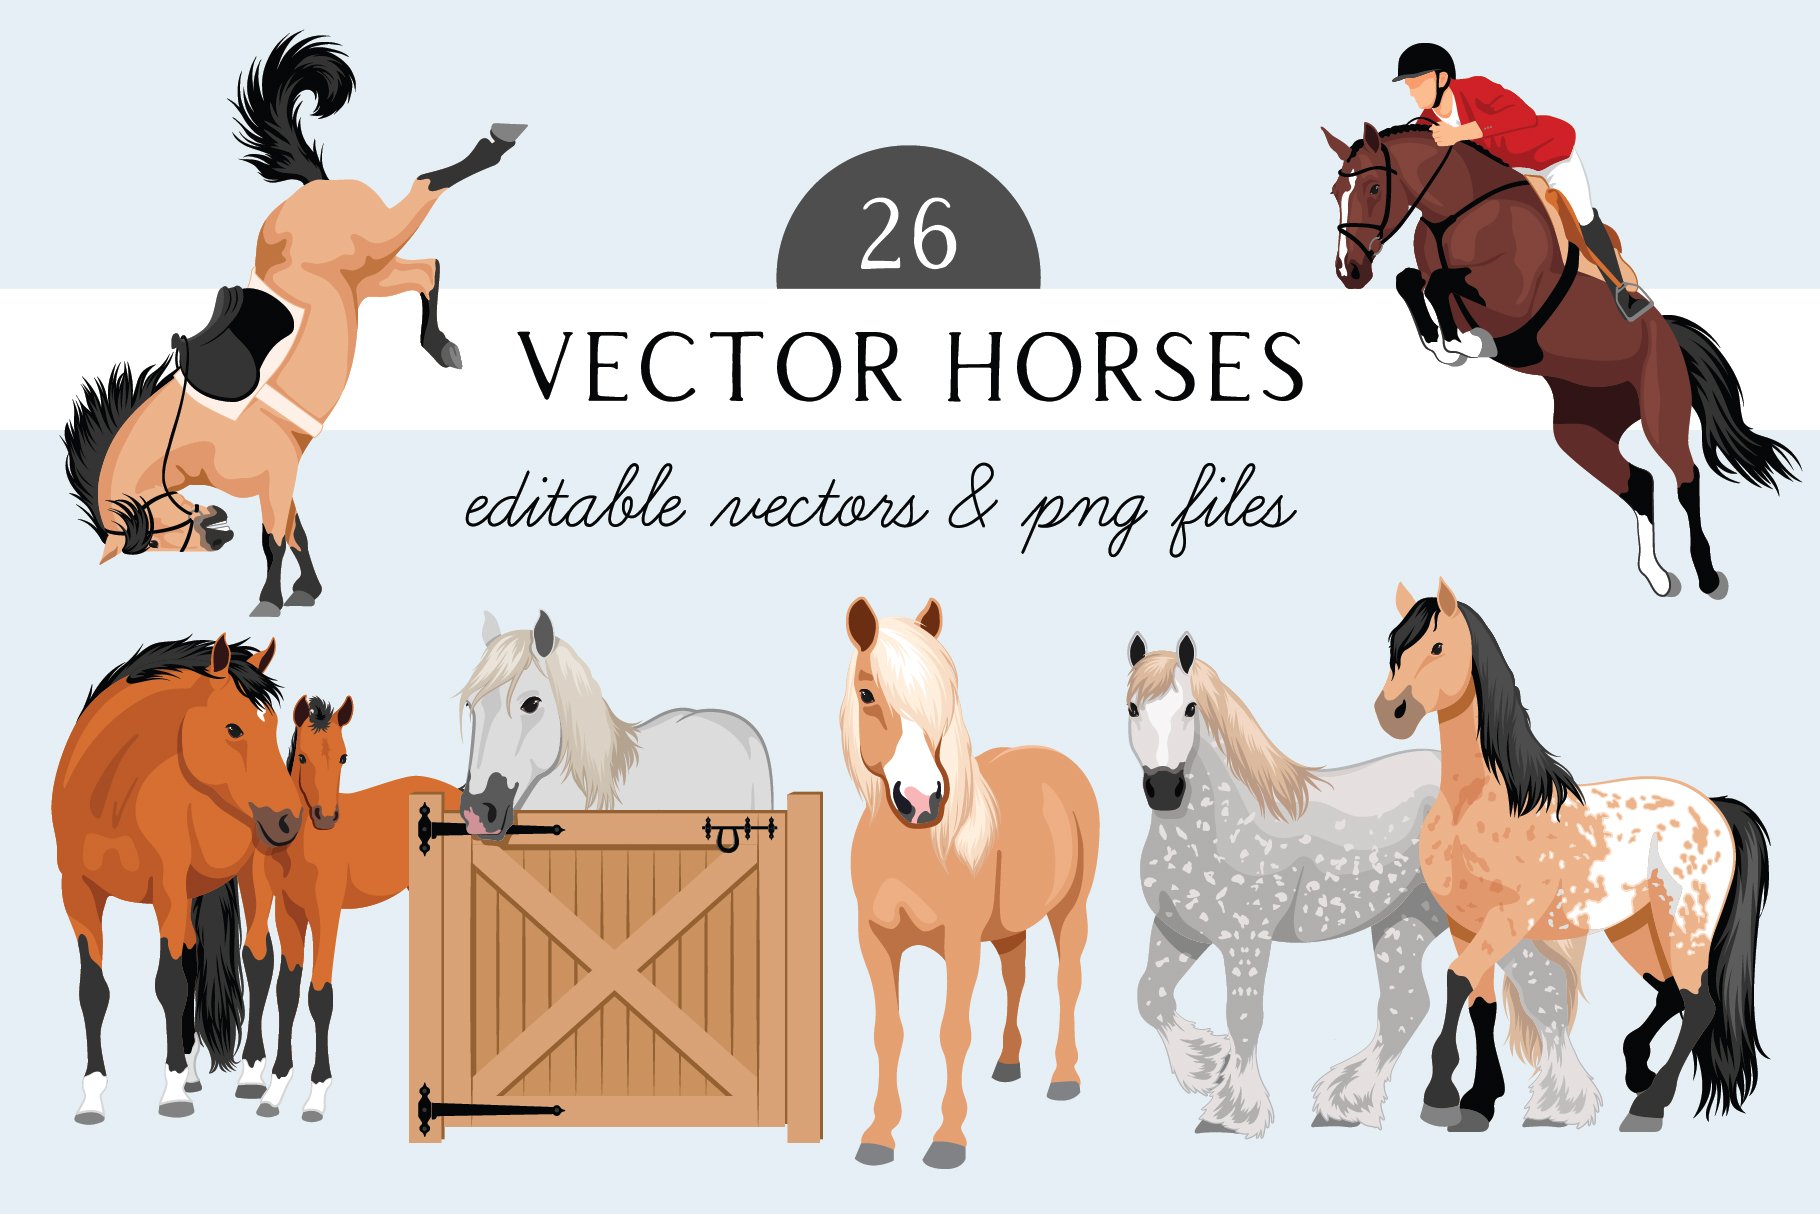 Horse Art Vector Equestrian Rodeo cover image.